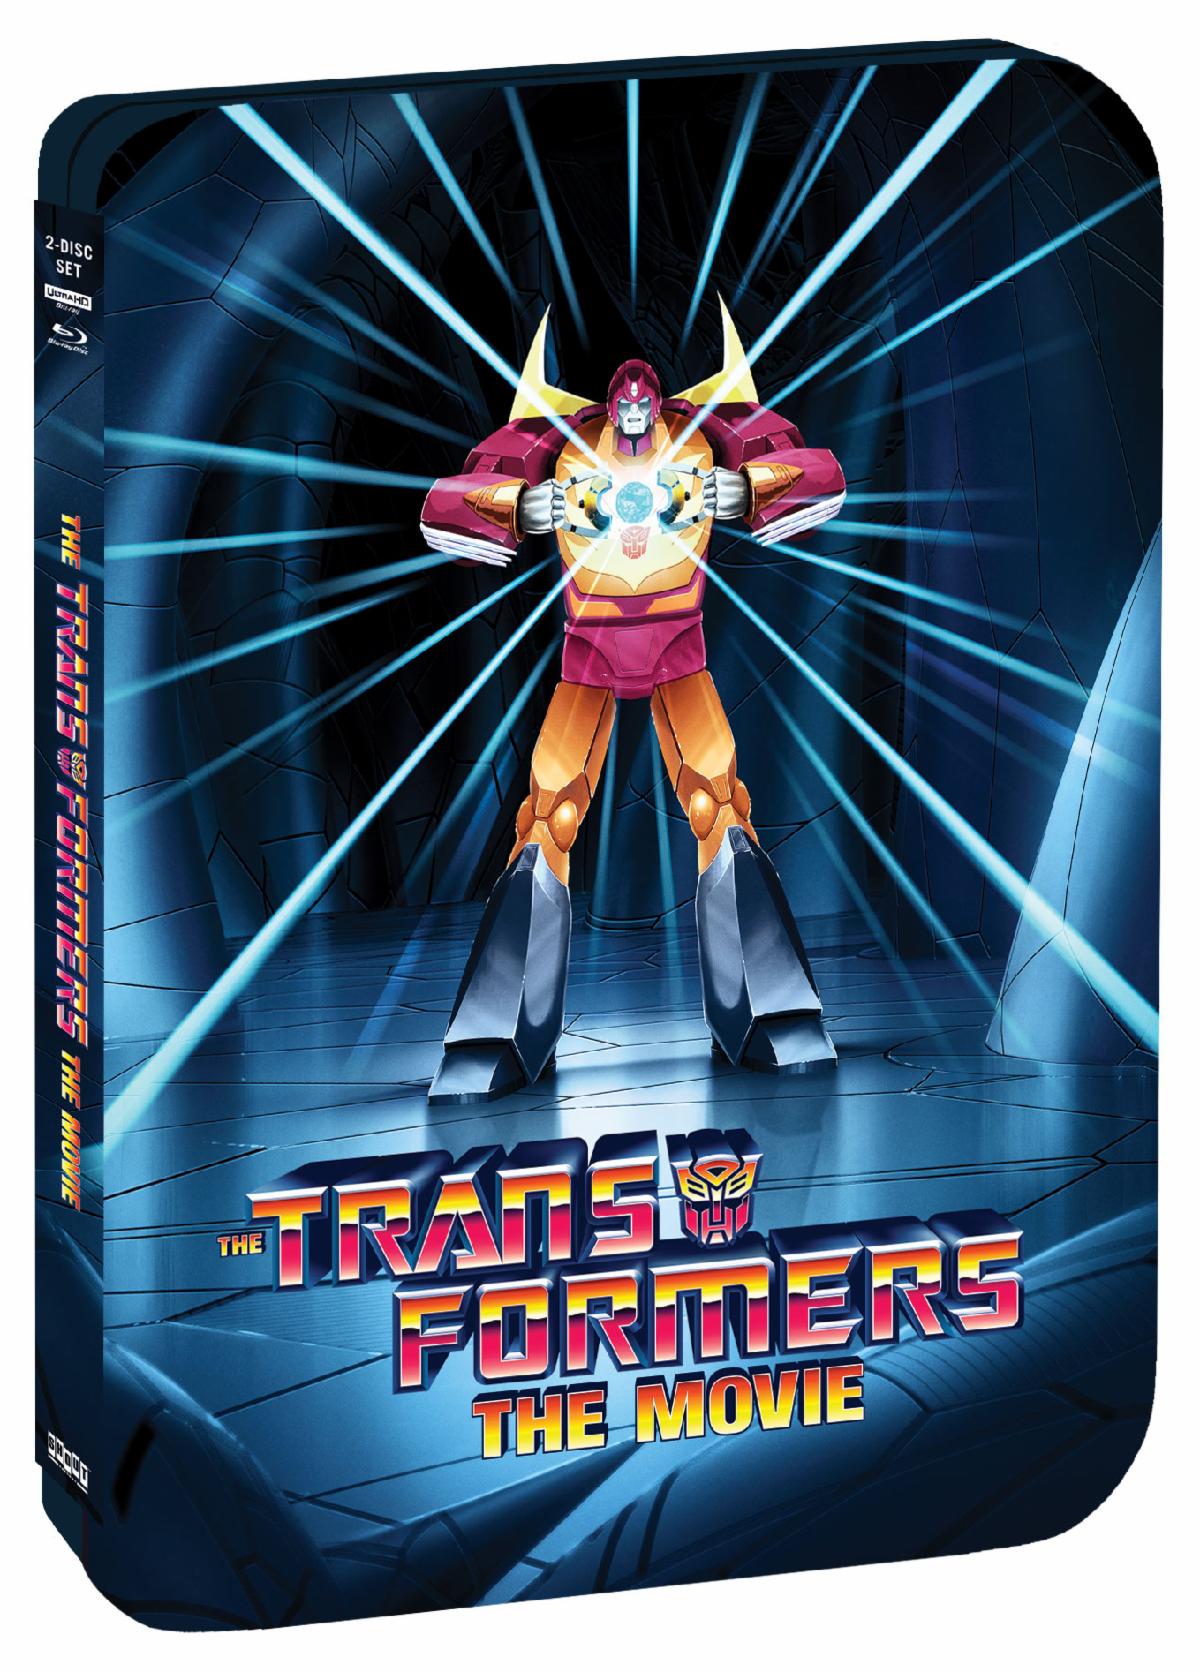 'The Transformers: The Movie' 35th Anniversary Limited Edition SteelBook Out August 3 from Shout! Factory